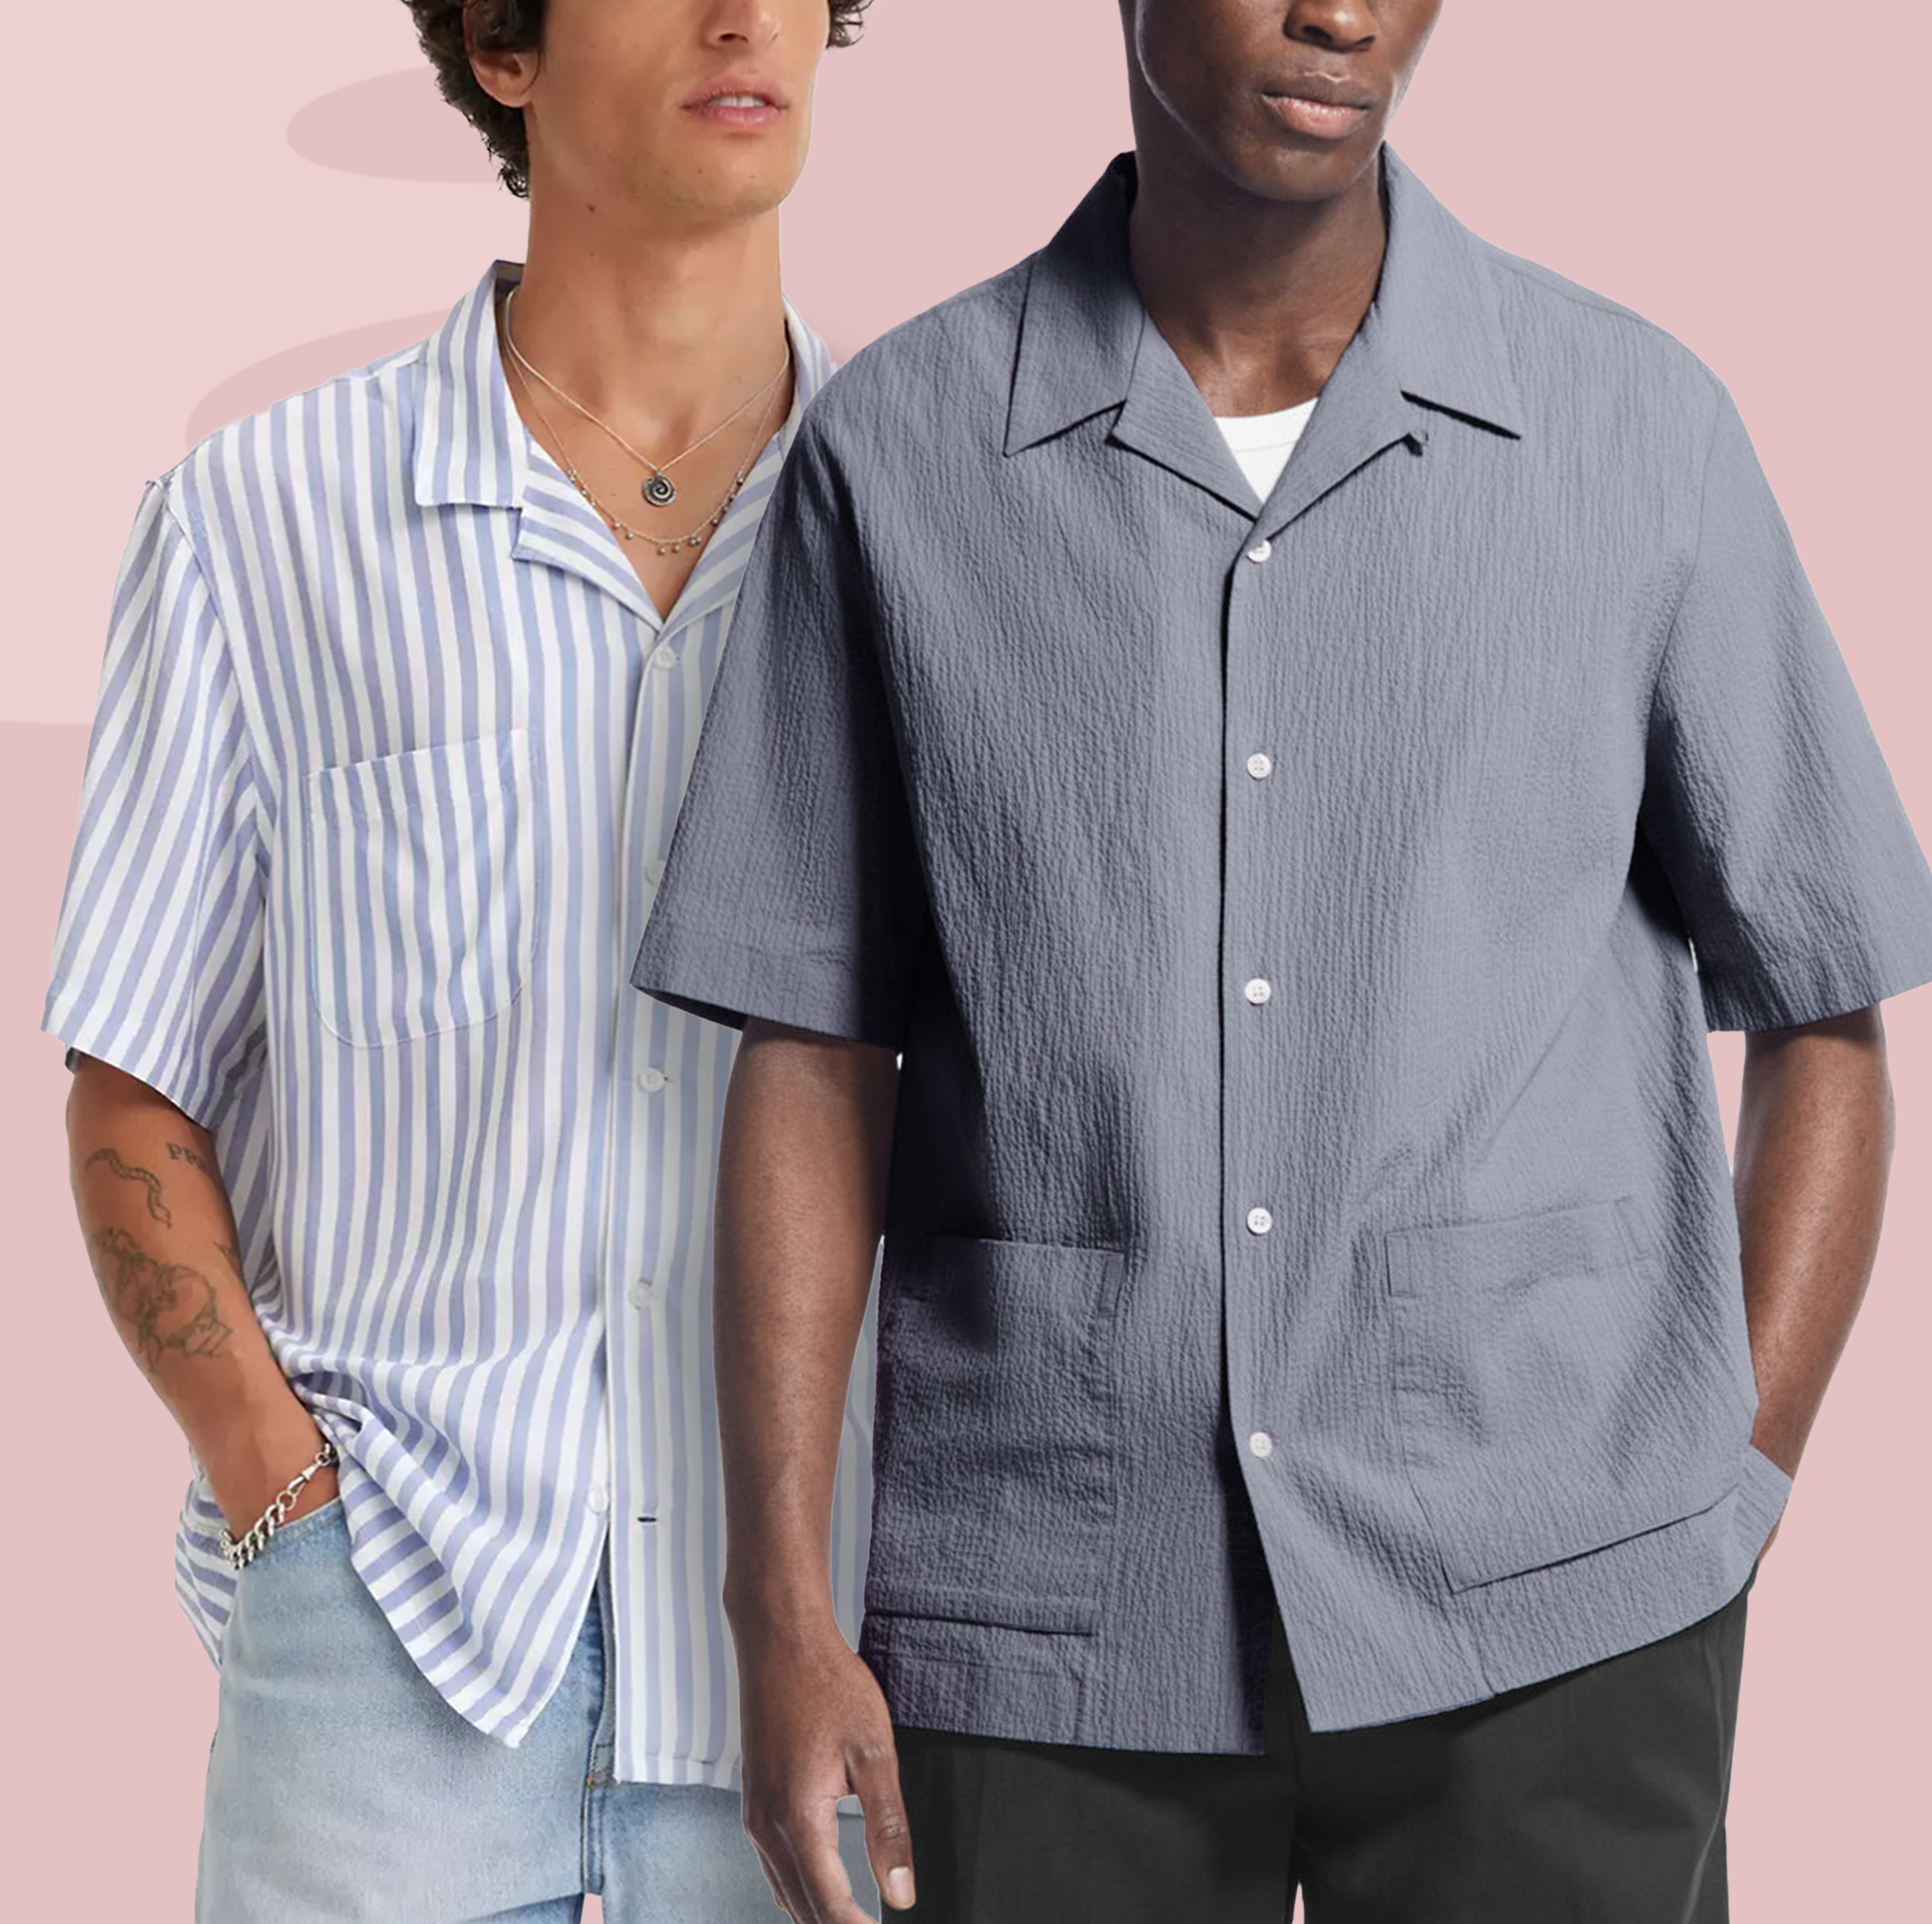 Camp-Collar Shirts Are Essential for Summer. Here Are 26 of the Best Ones.